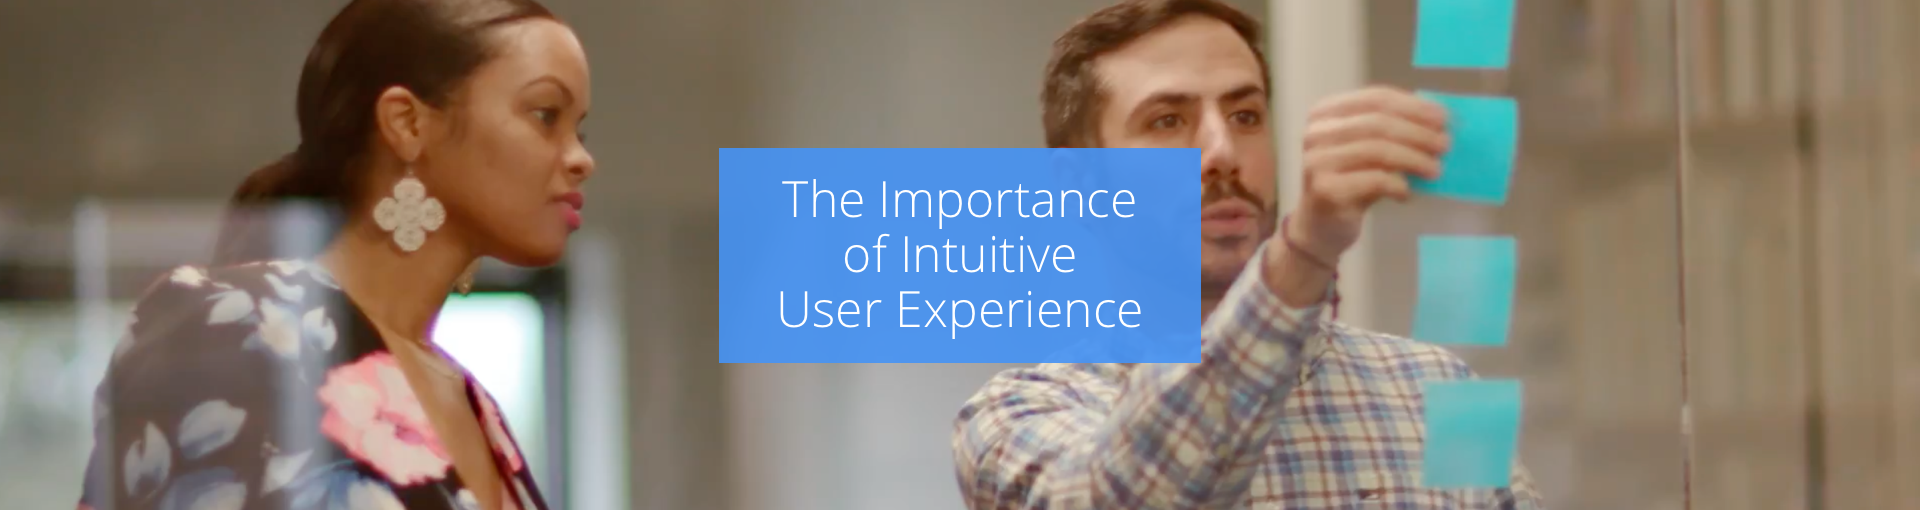 The Importance of Intuitive User Experience Featured Image